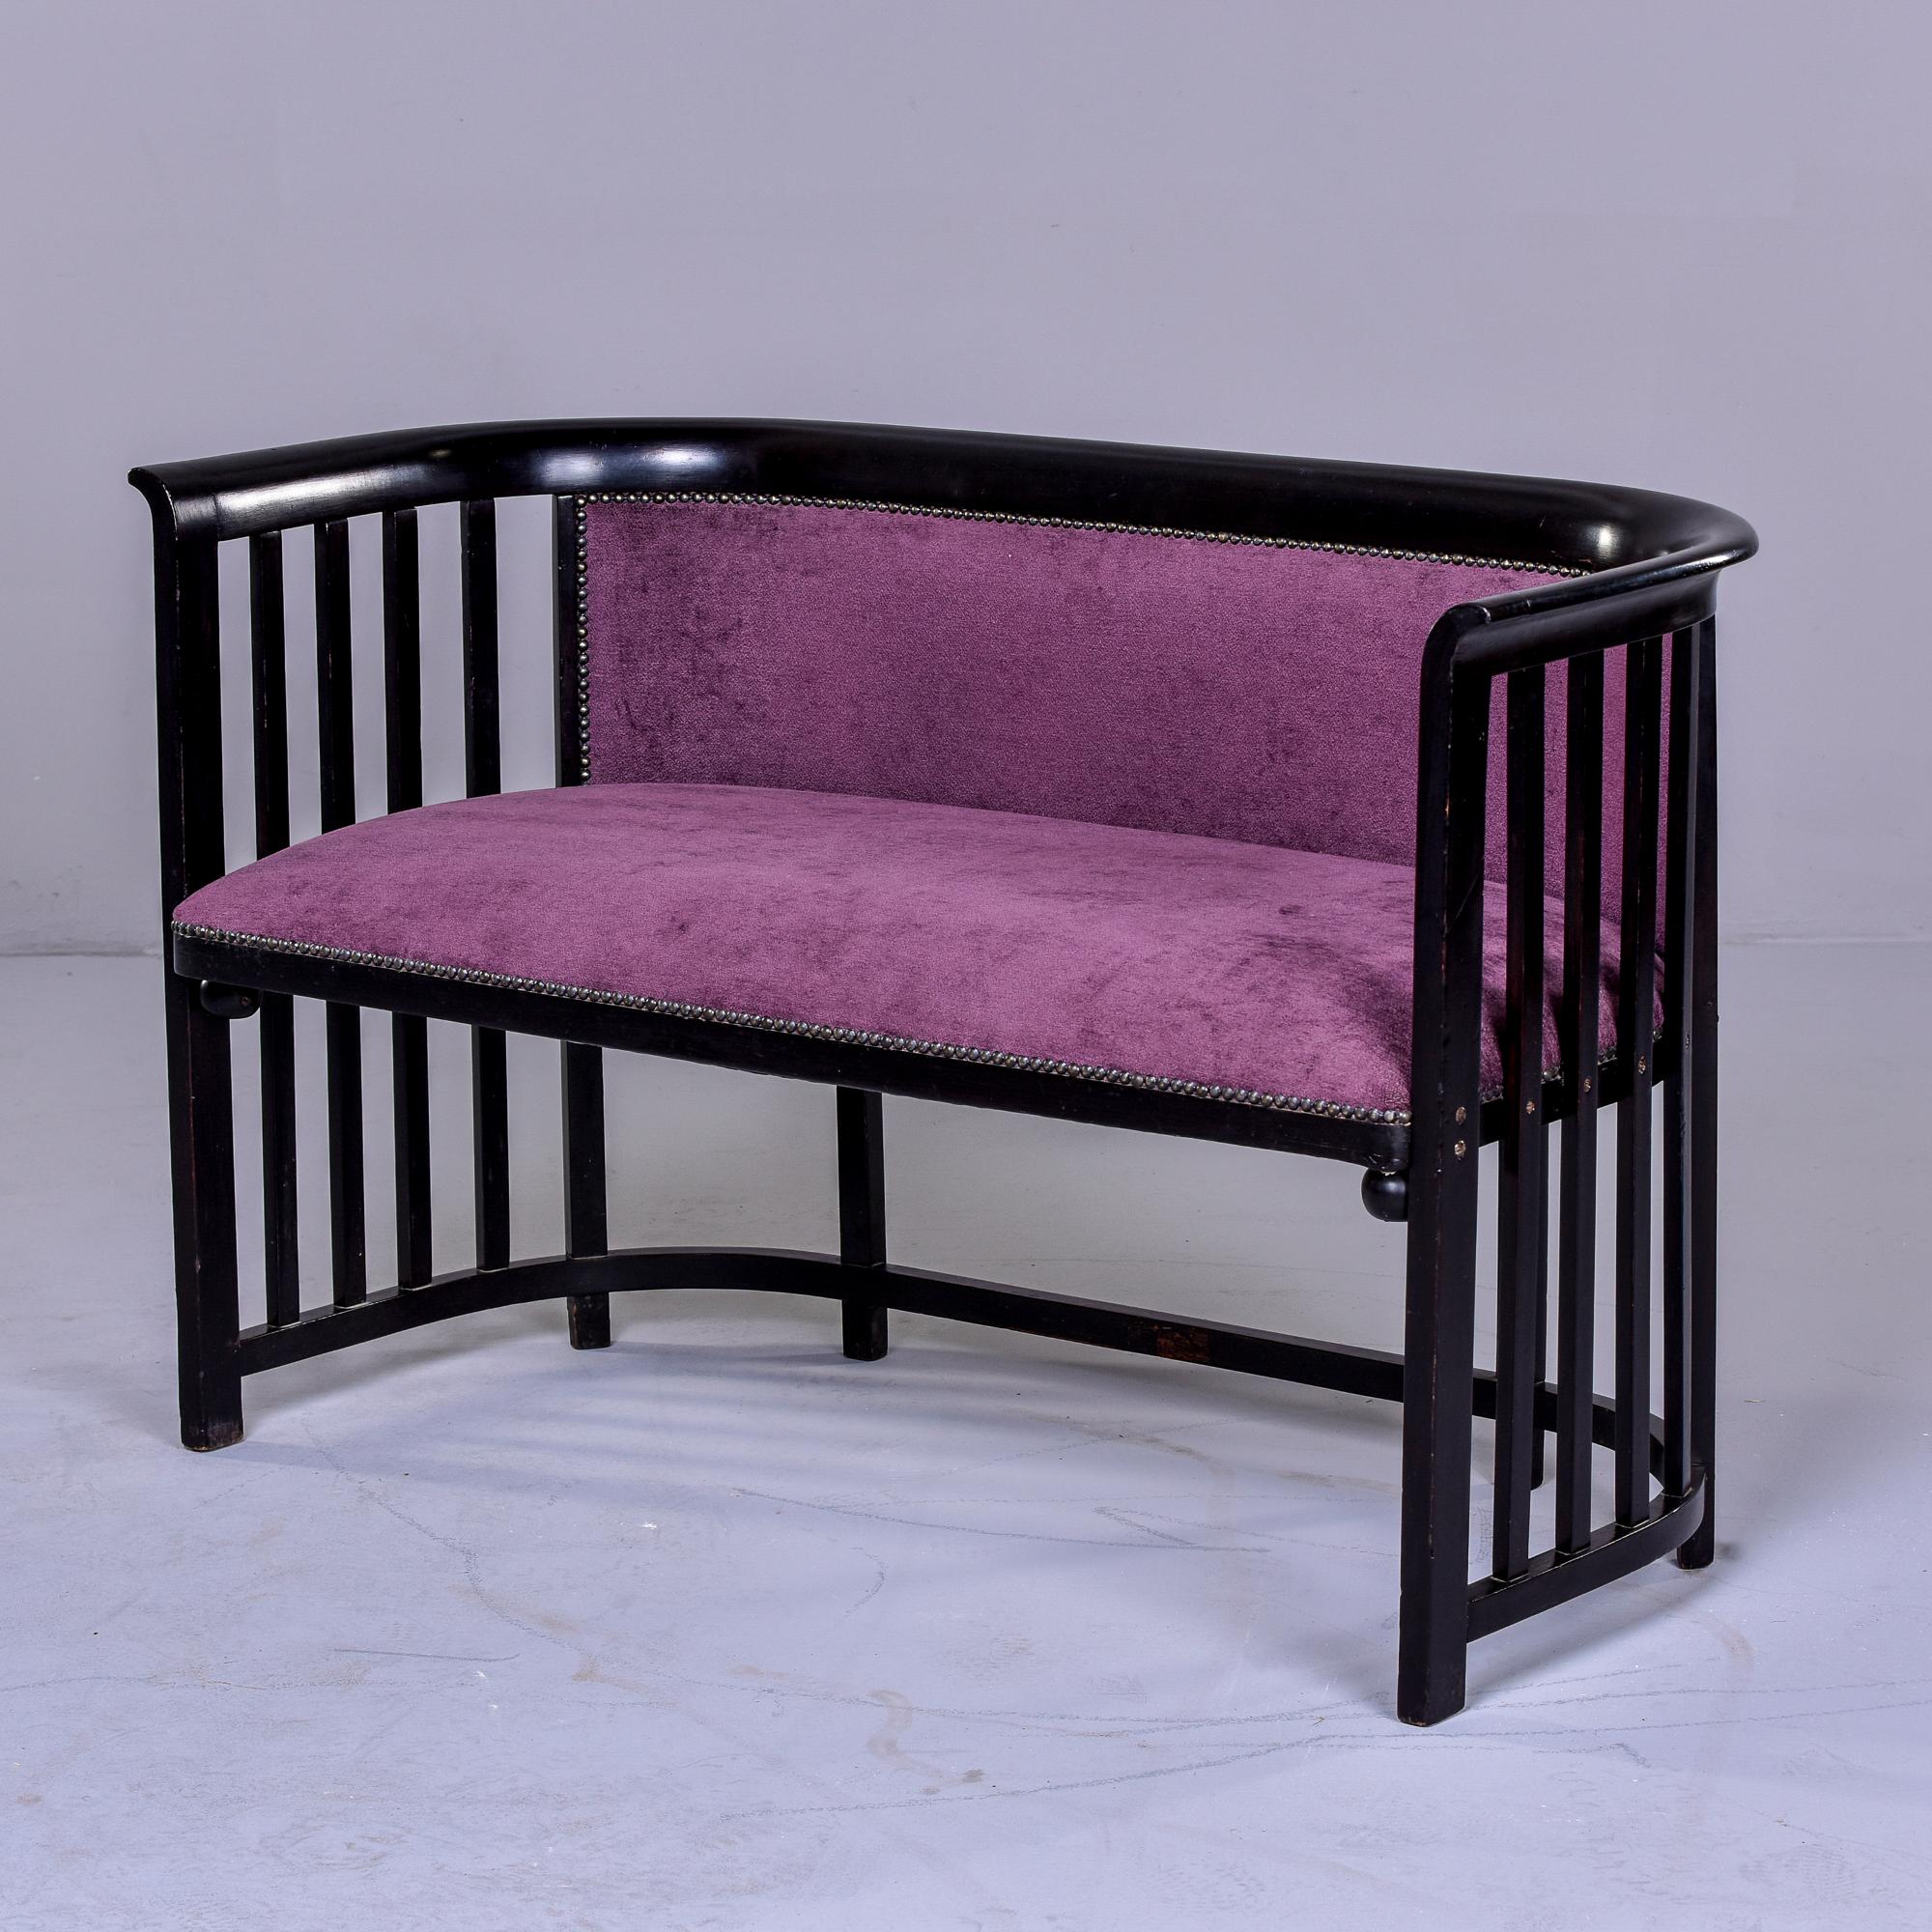 Circa 1910s classic settee designed by Josef Hoffmann. We believe this was manufactured by Austrian manufacturer Jacob & Josef Kohn but have no found markings. Slatted sides and black stained bent beech. This piece was reupholstered in a plum